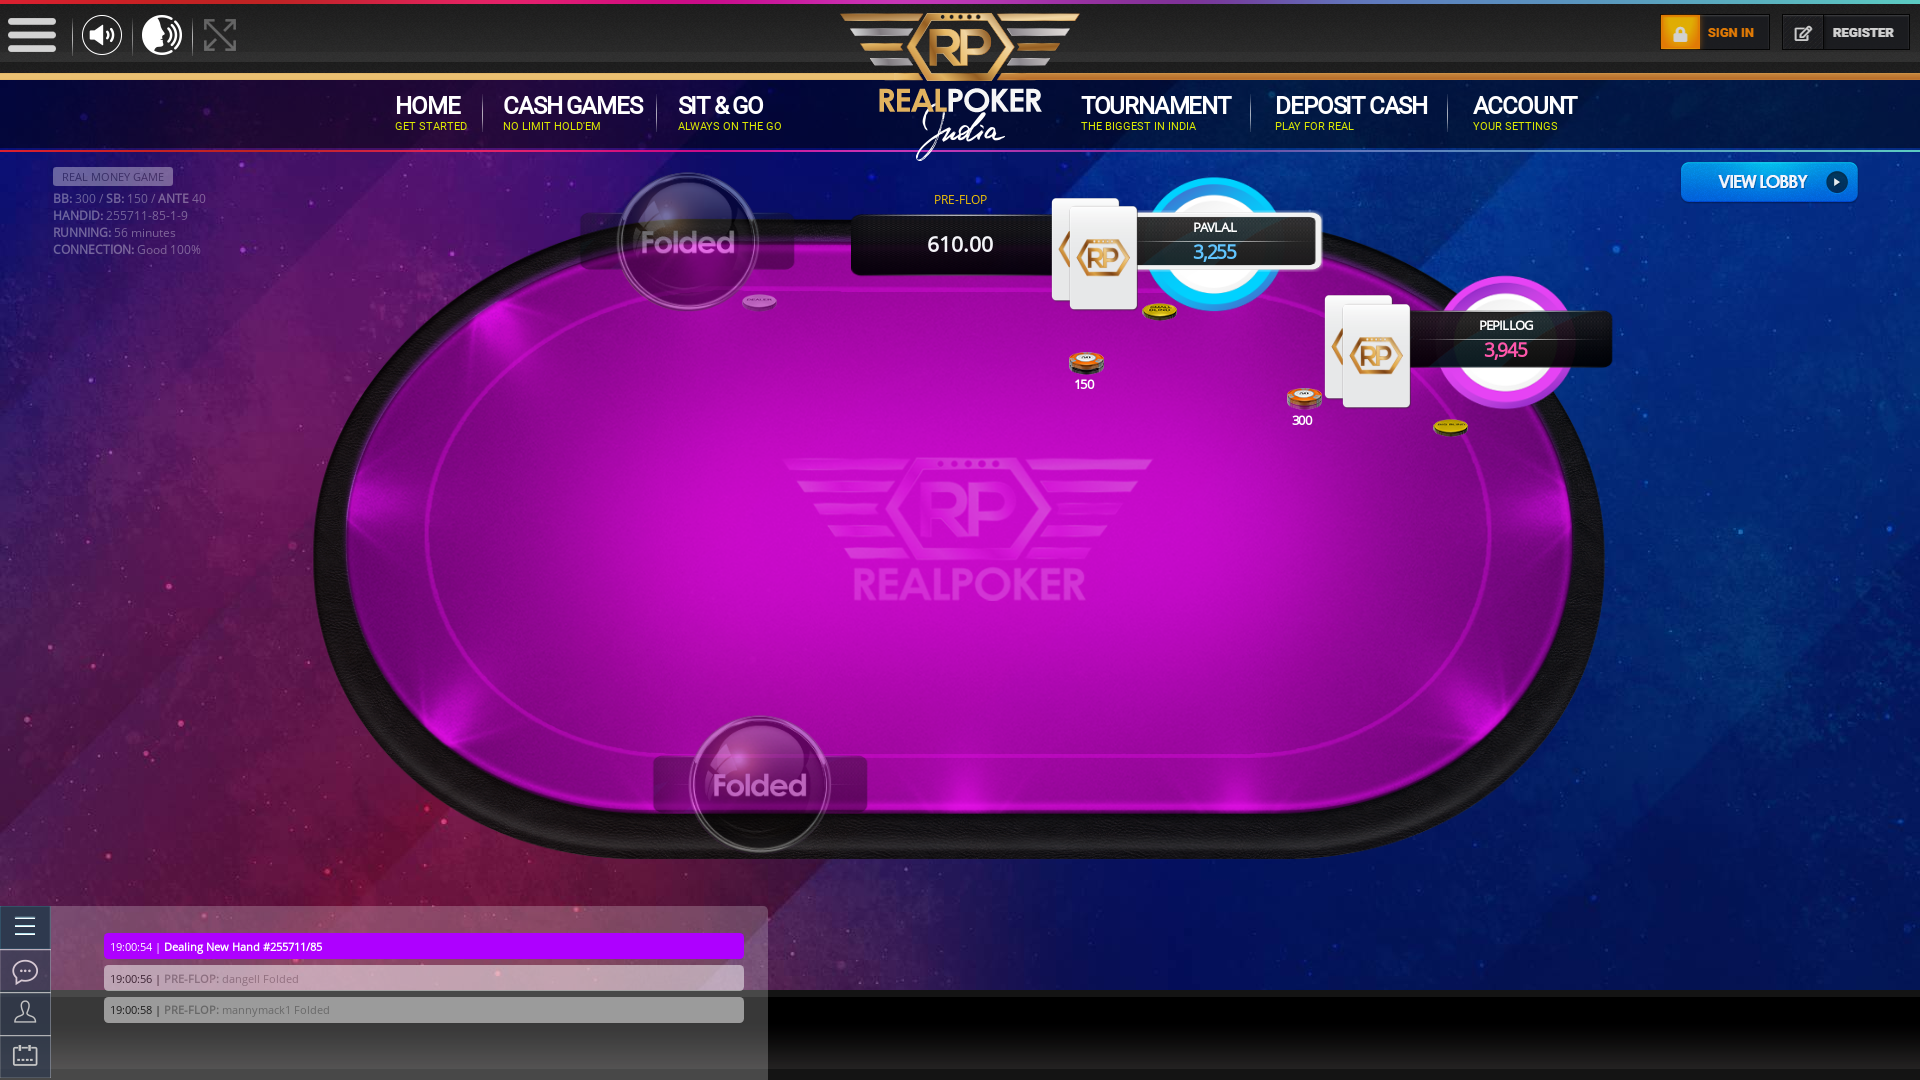 Real poker 10 player table in the 56th minute